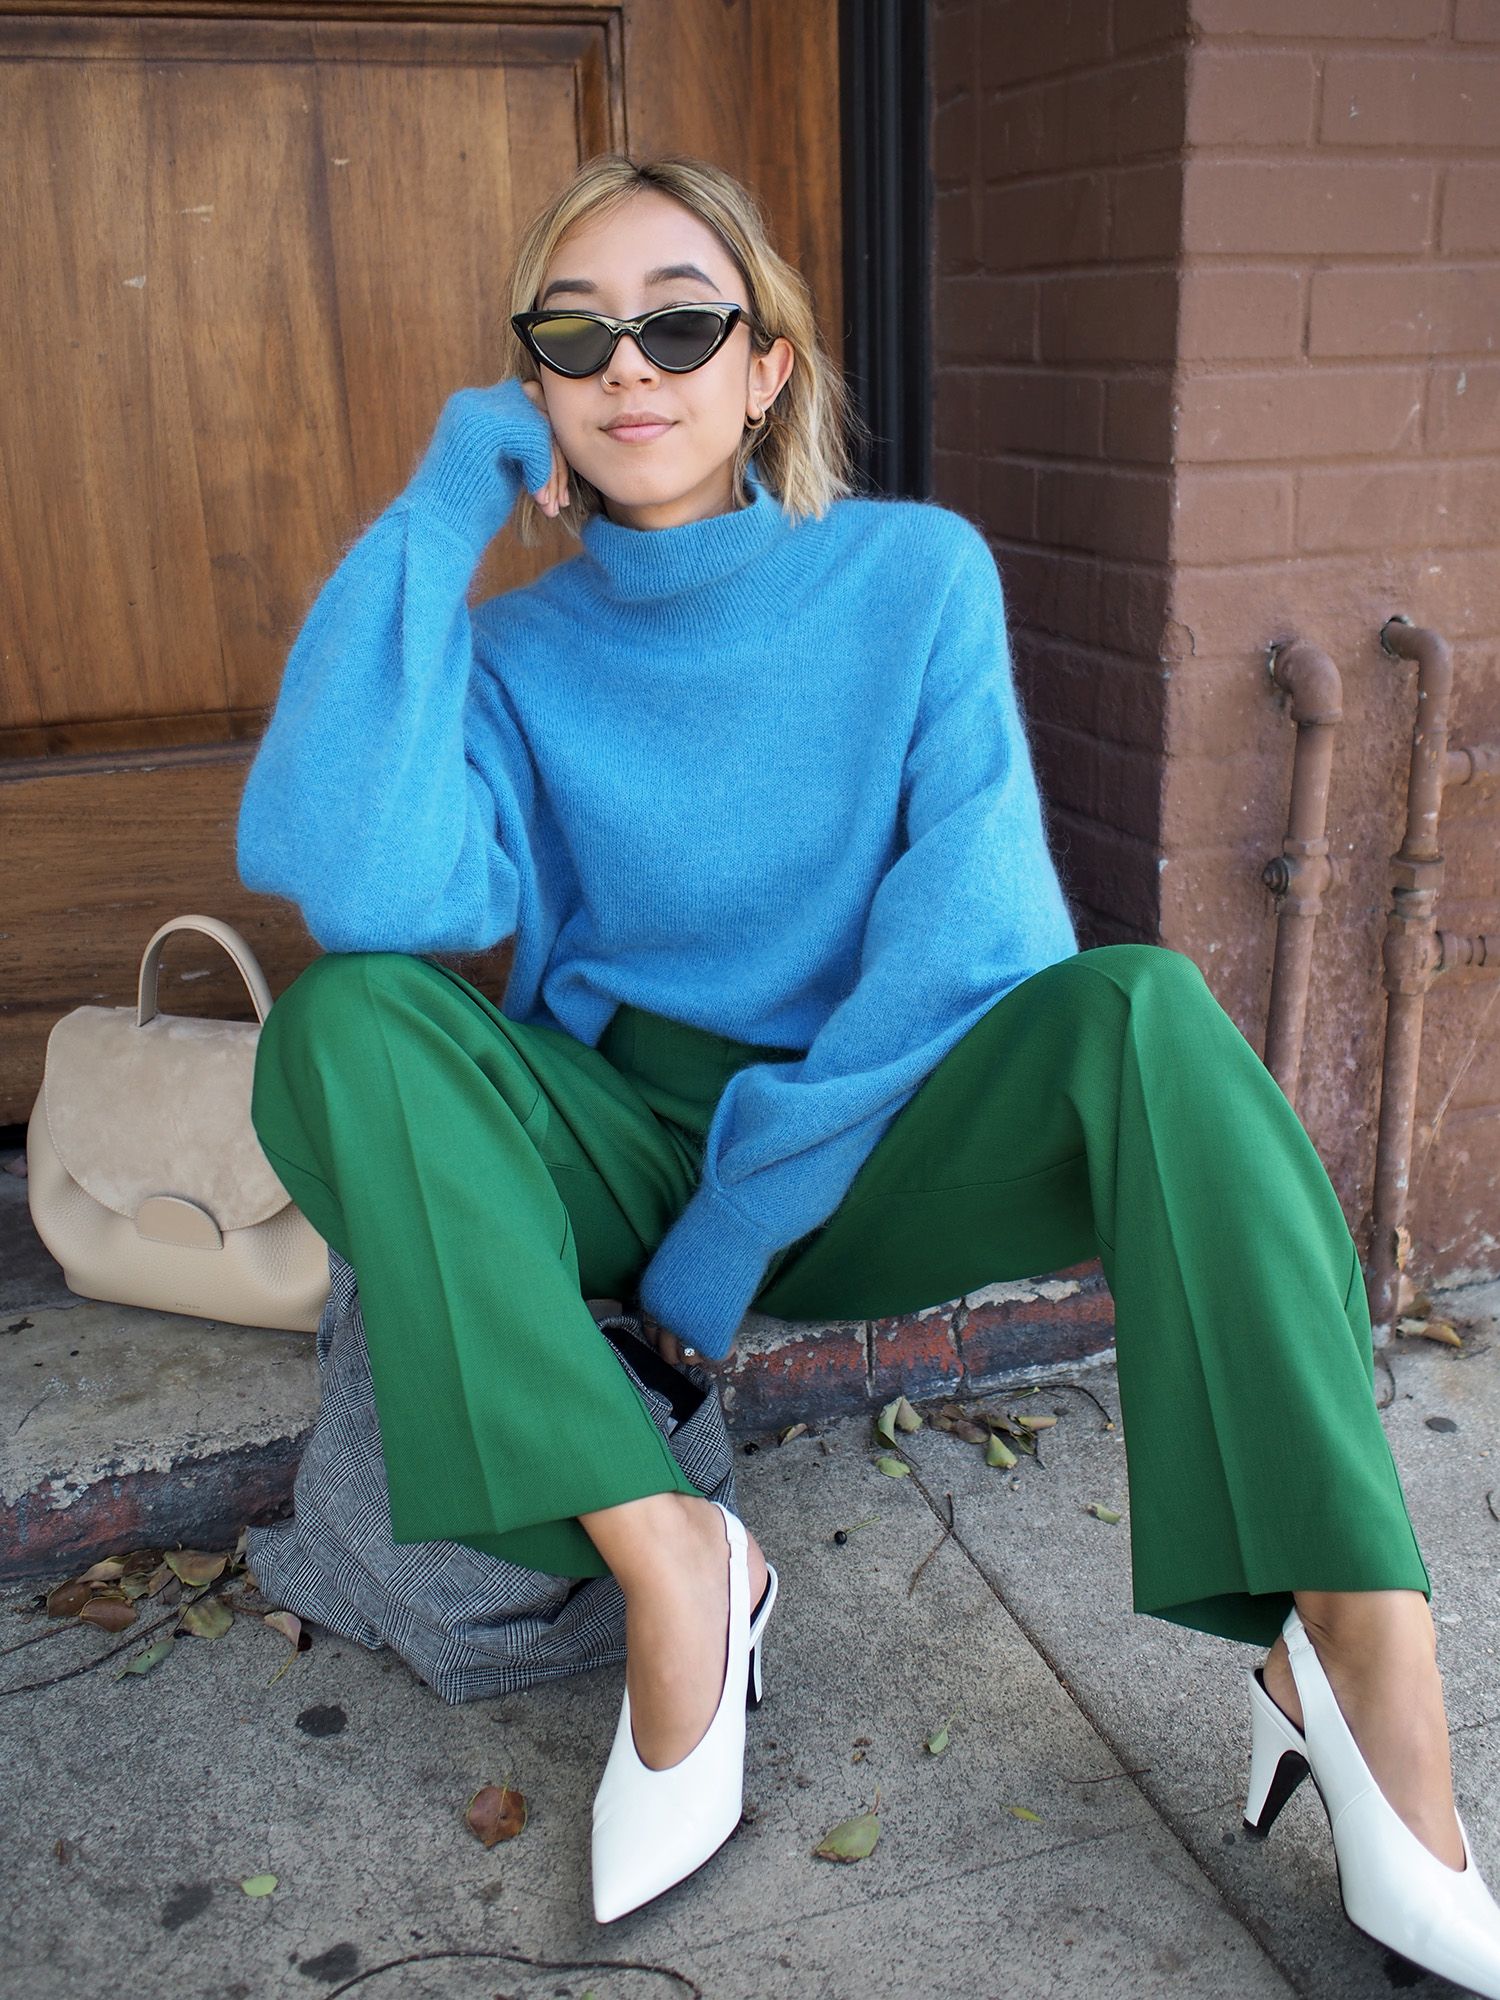 Stay Stylish in the Office with Green Trousers